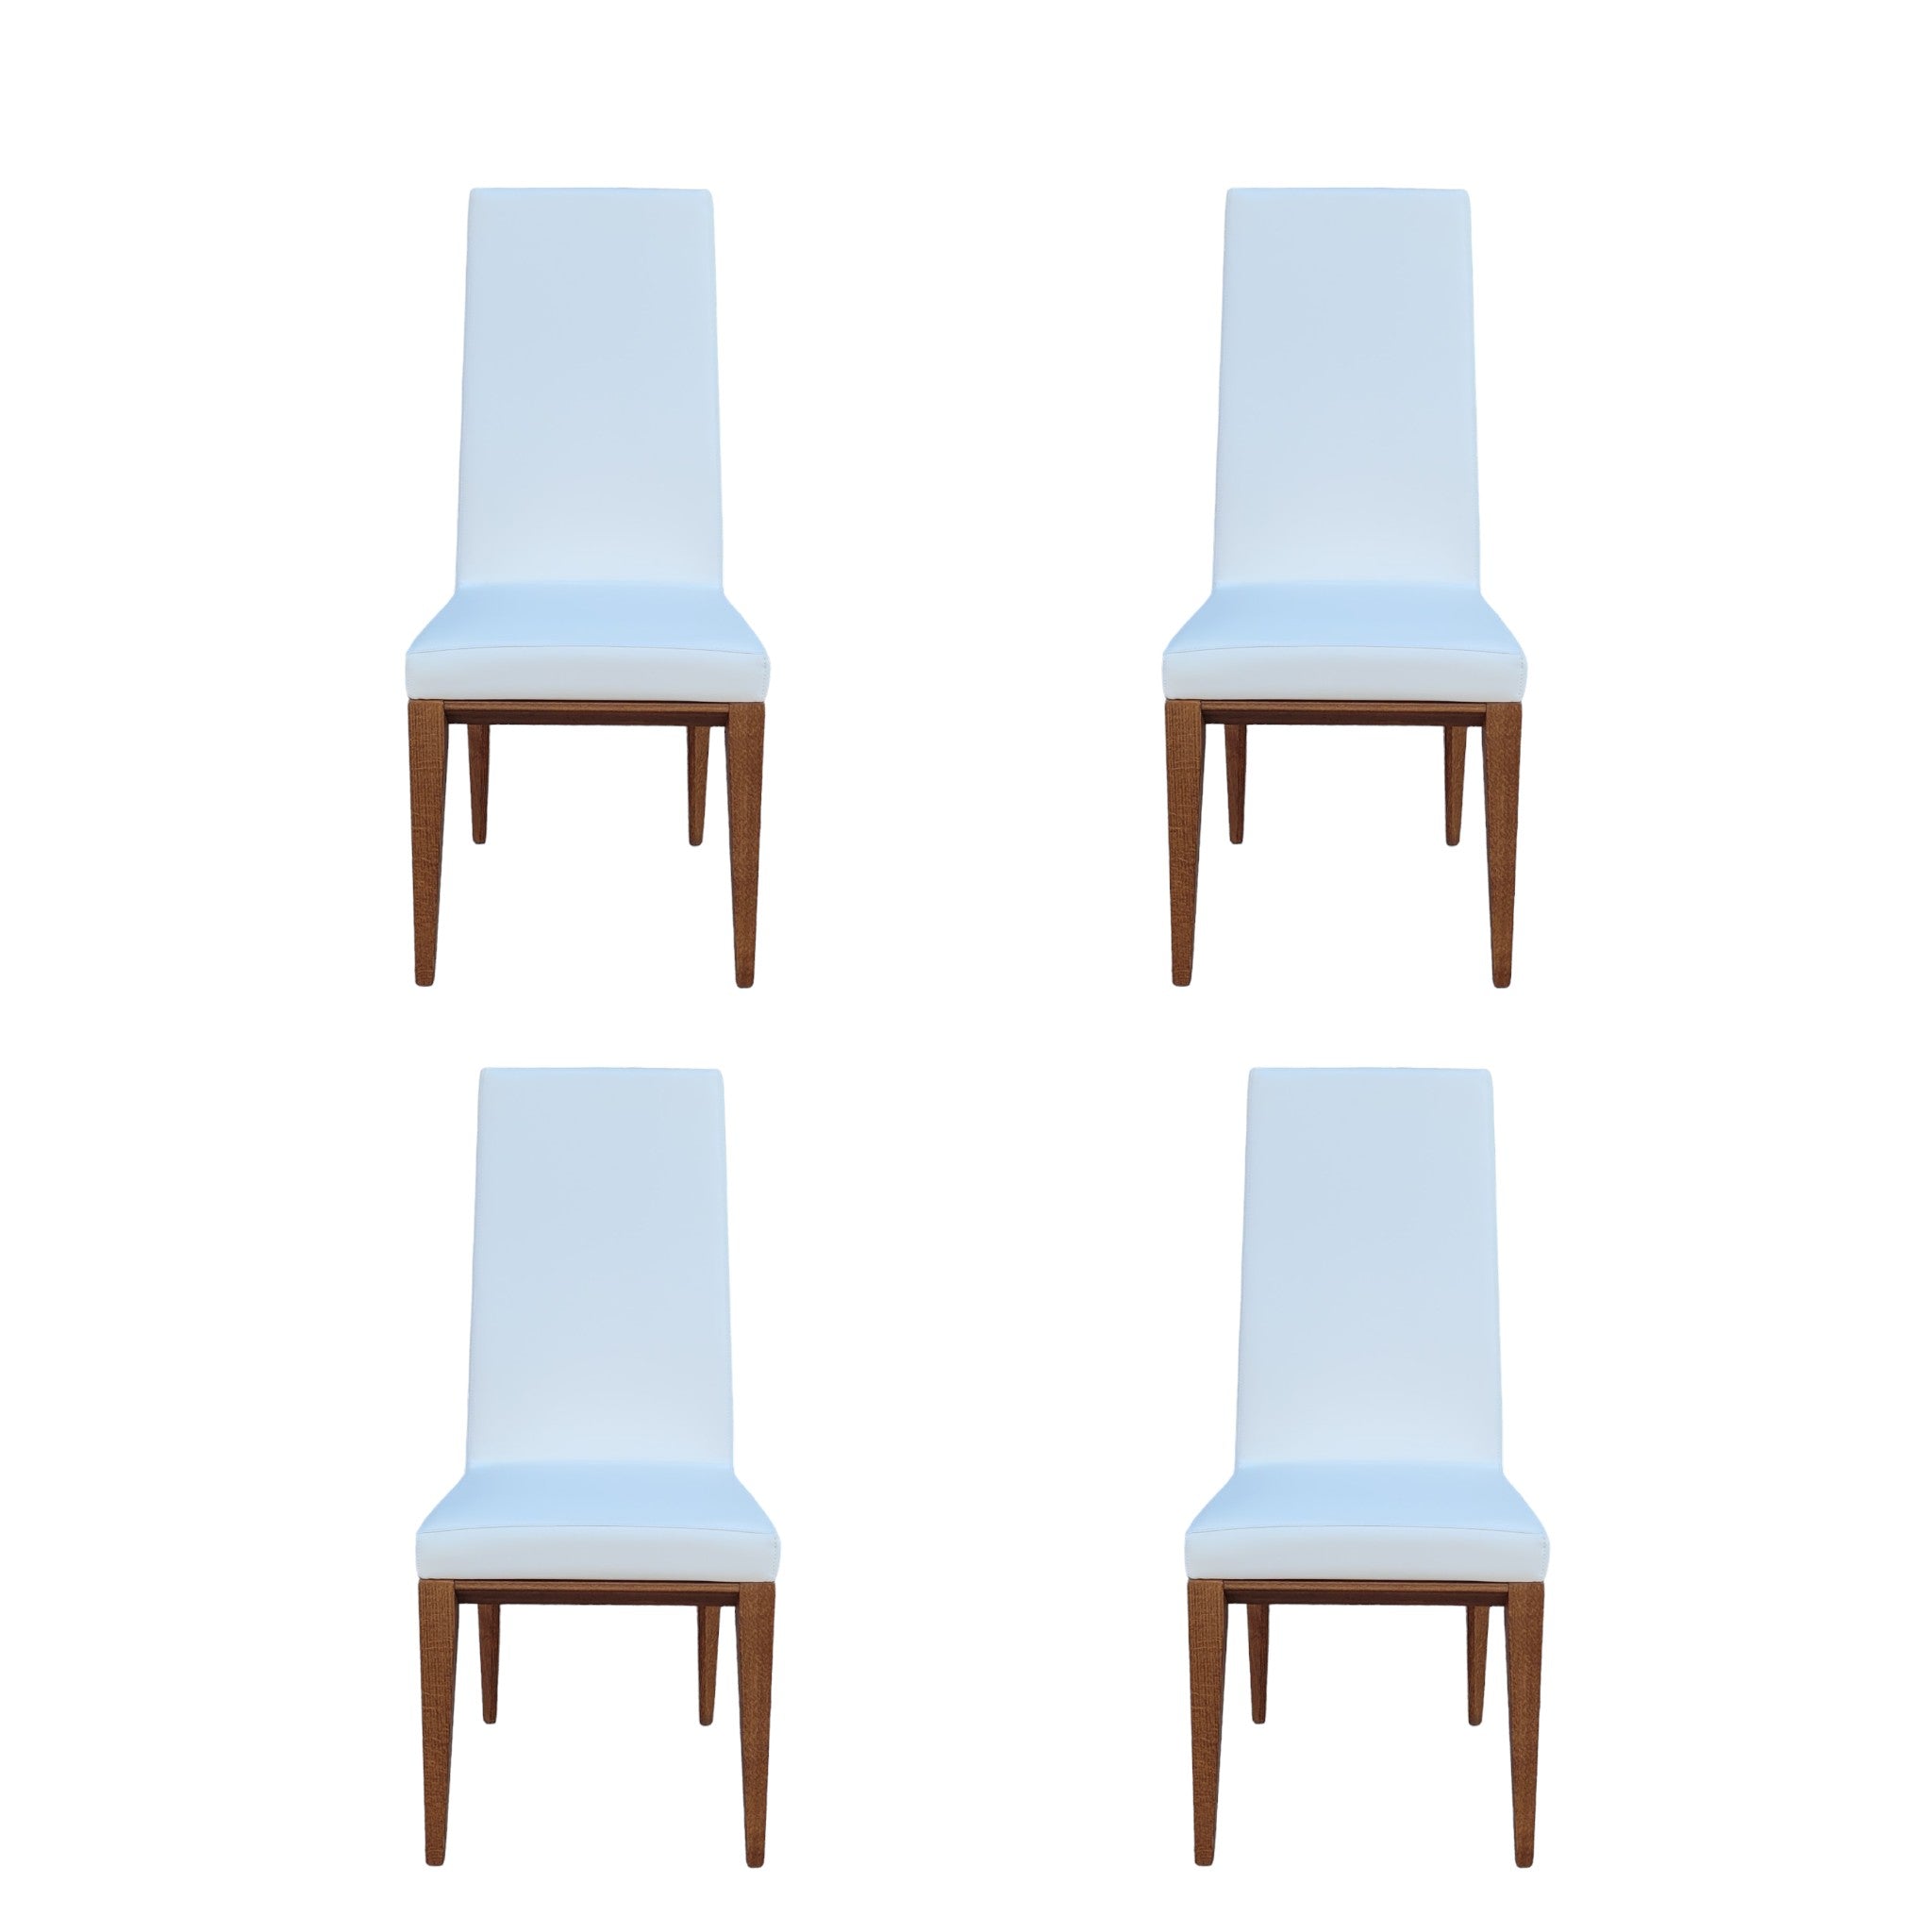 Bess Dining Chair (sold as set of 4)